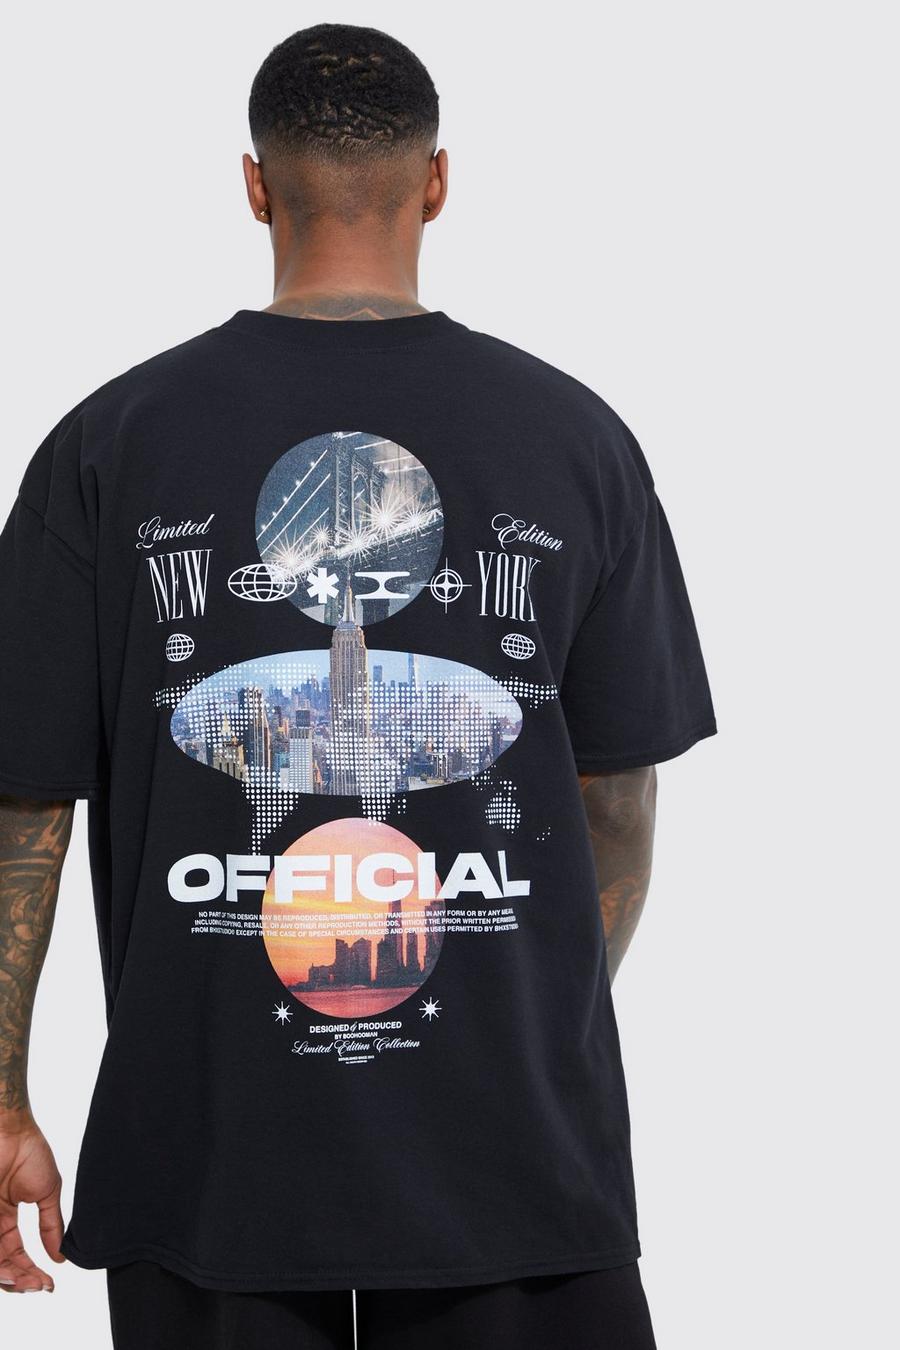 Oversized City Scape Back Graphic T-shirt | boohoo